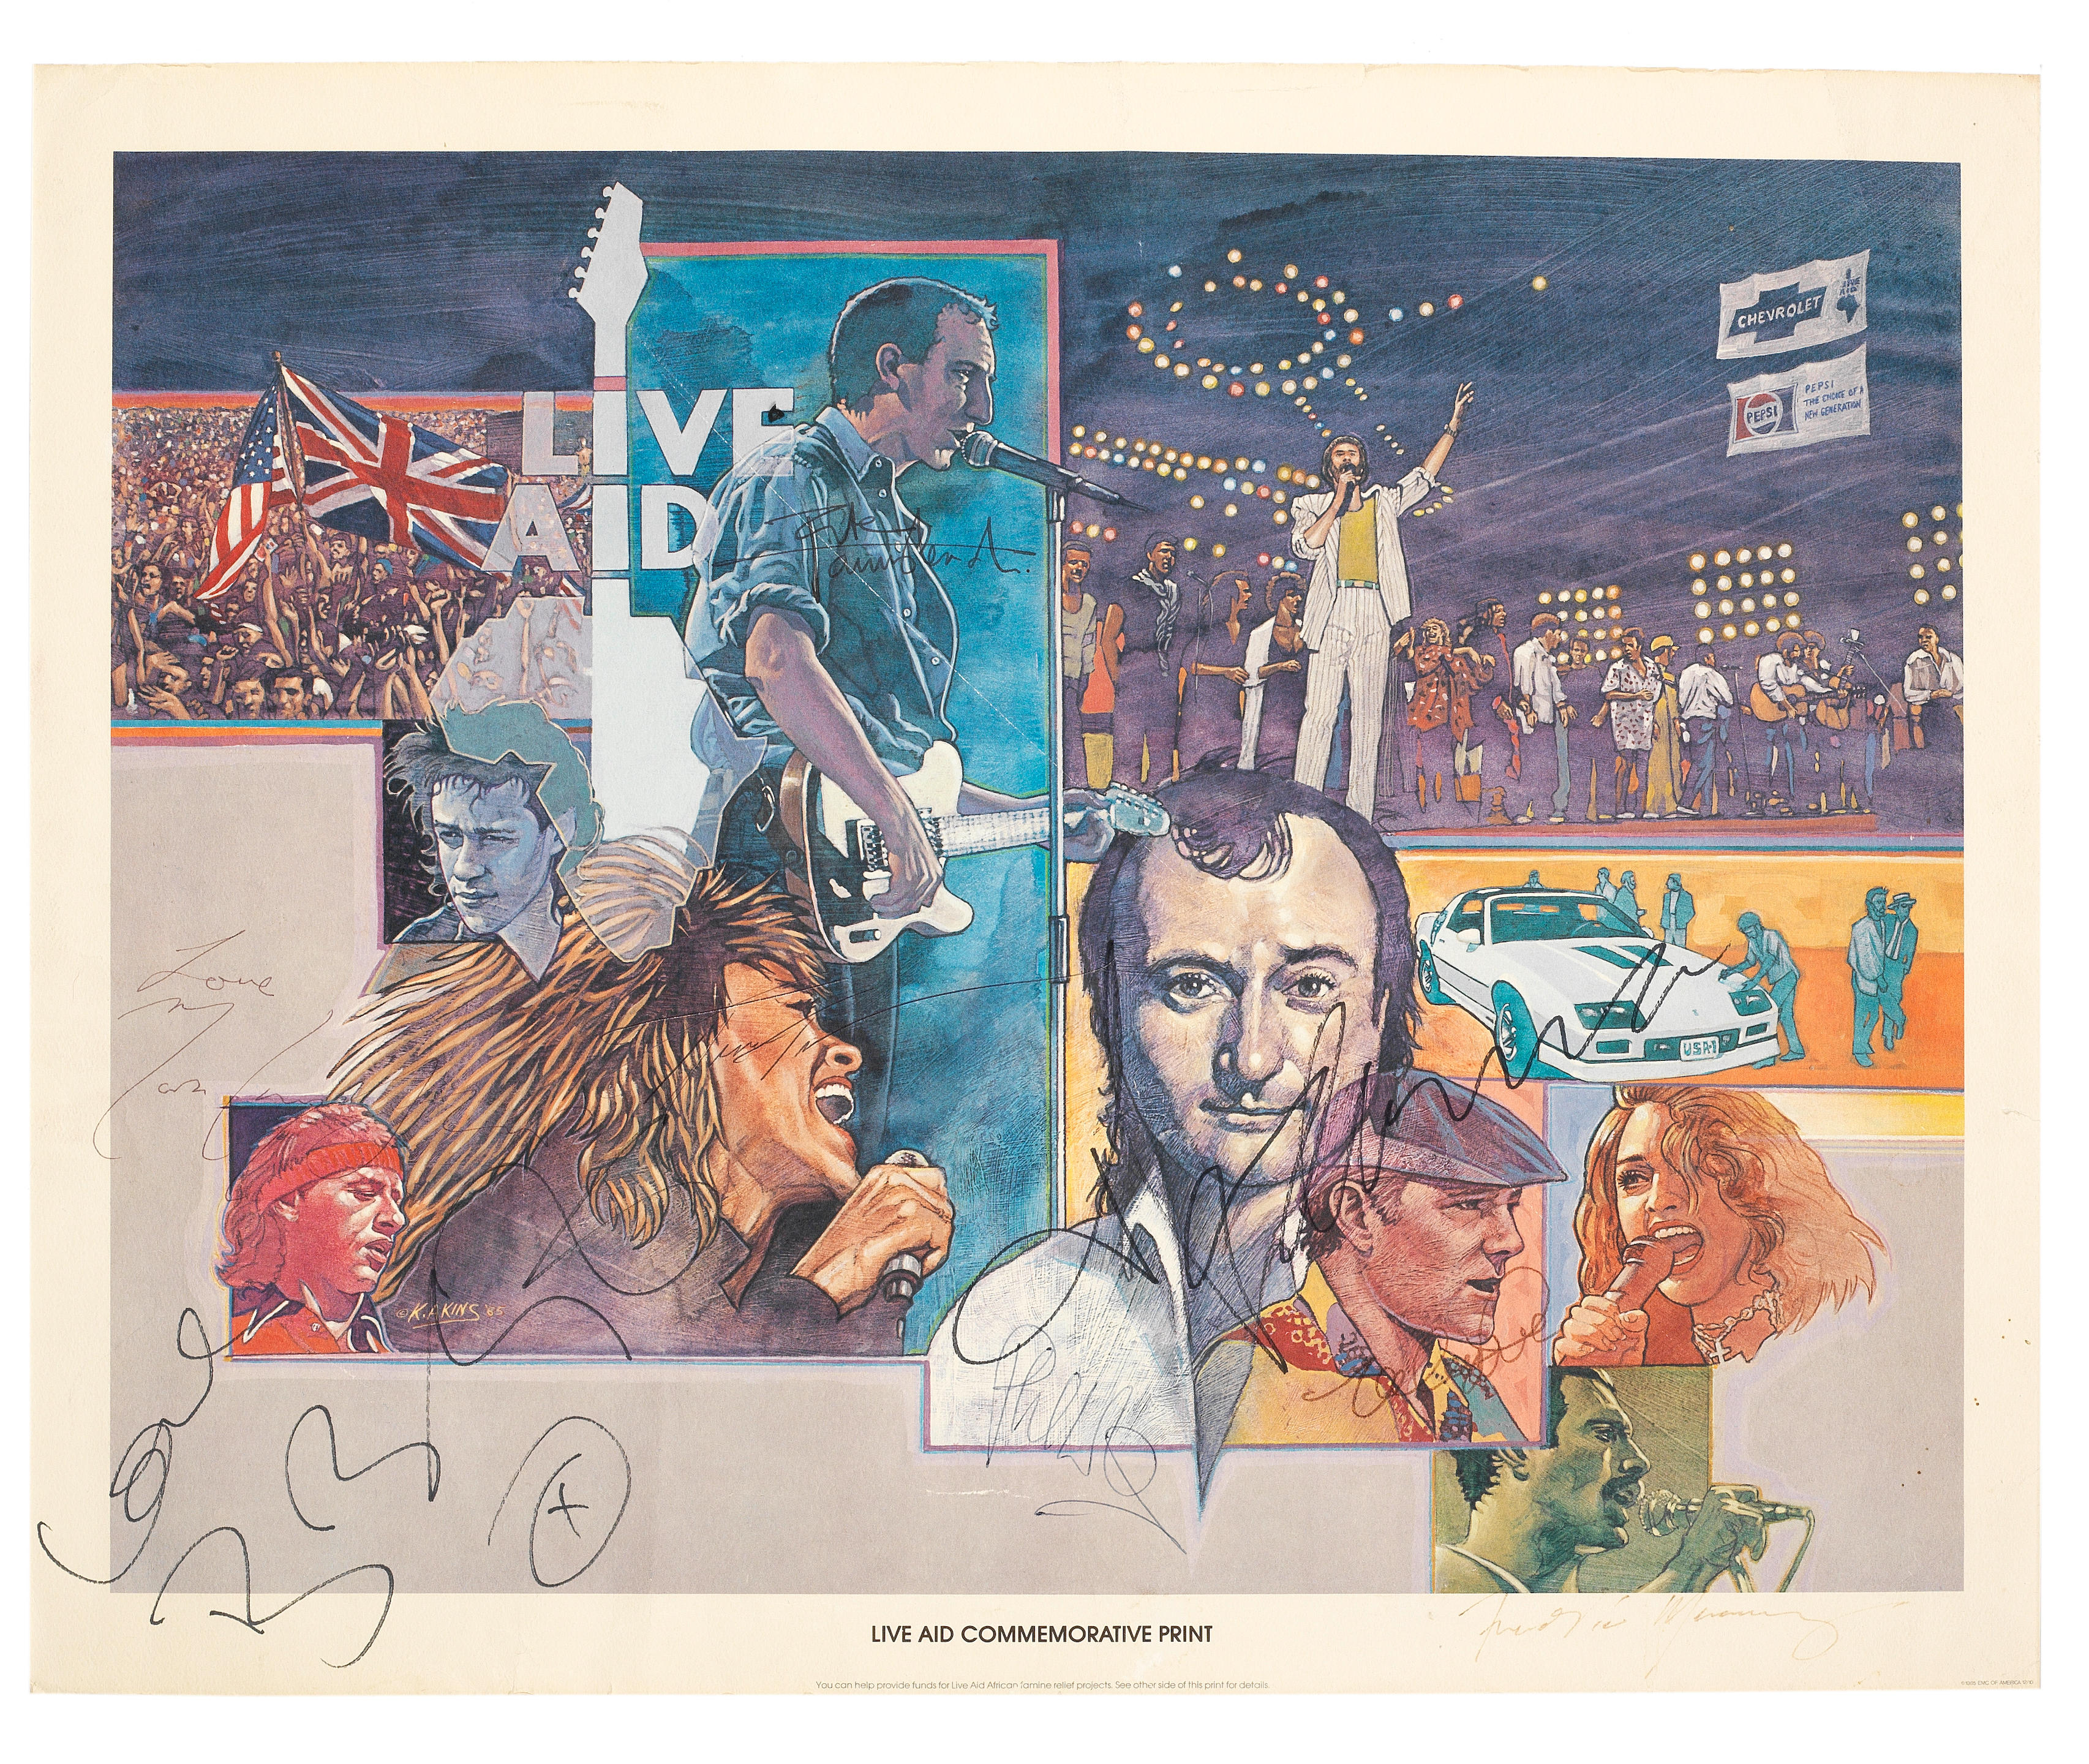 Live Aid: A commemorative print signed by various musicians who performed...